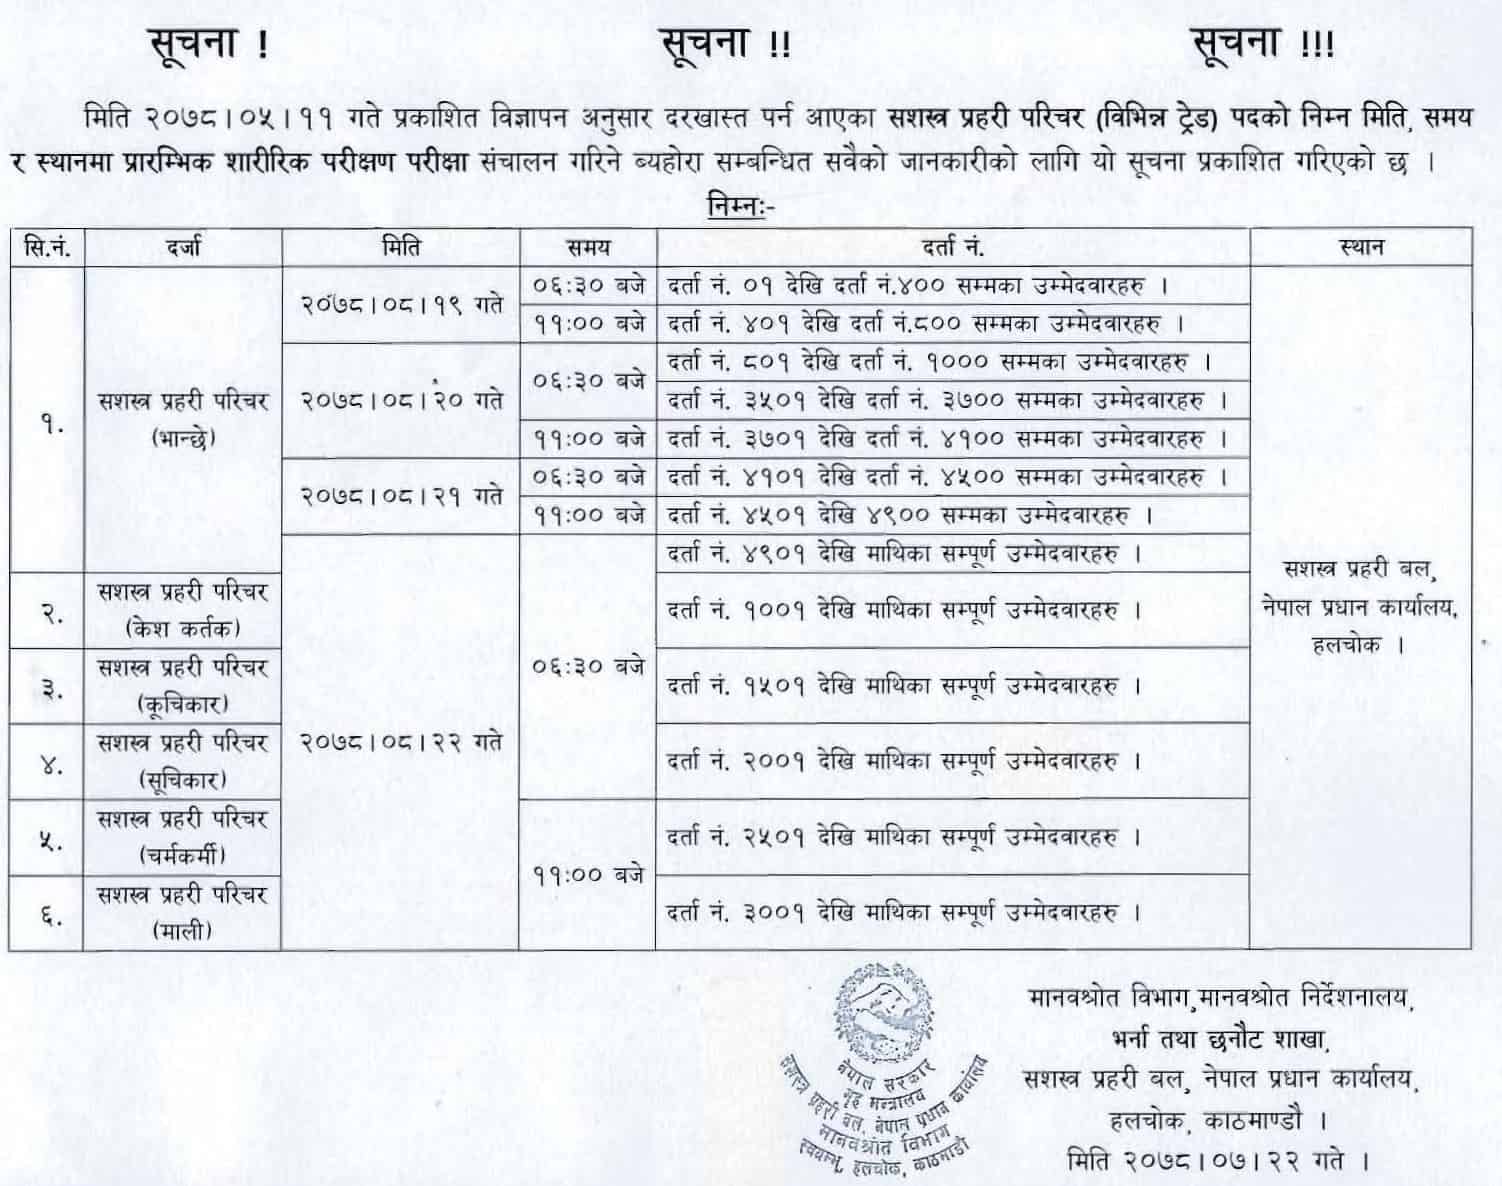 APF Nepal Parichar Post (Various Trade) Physical Examination Schedule